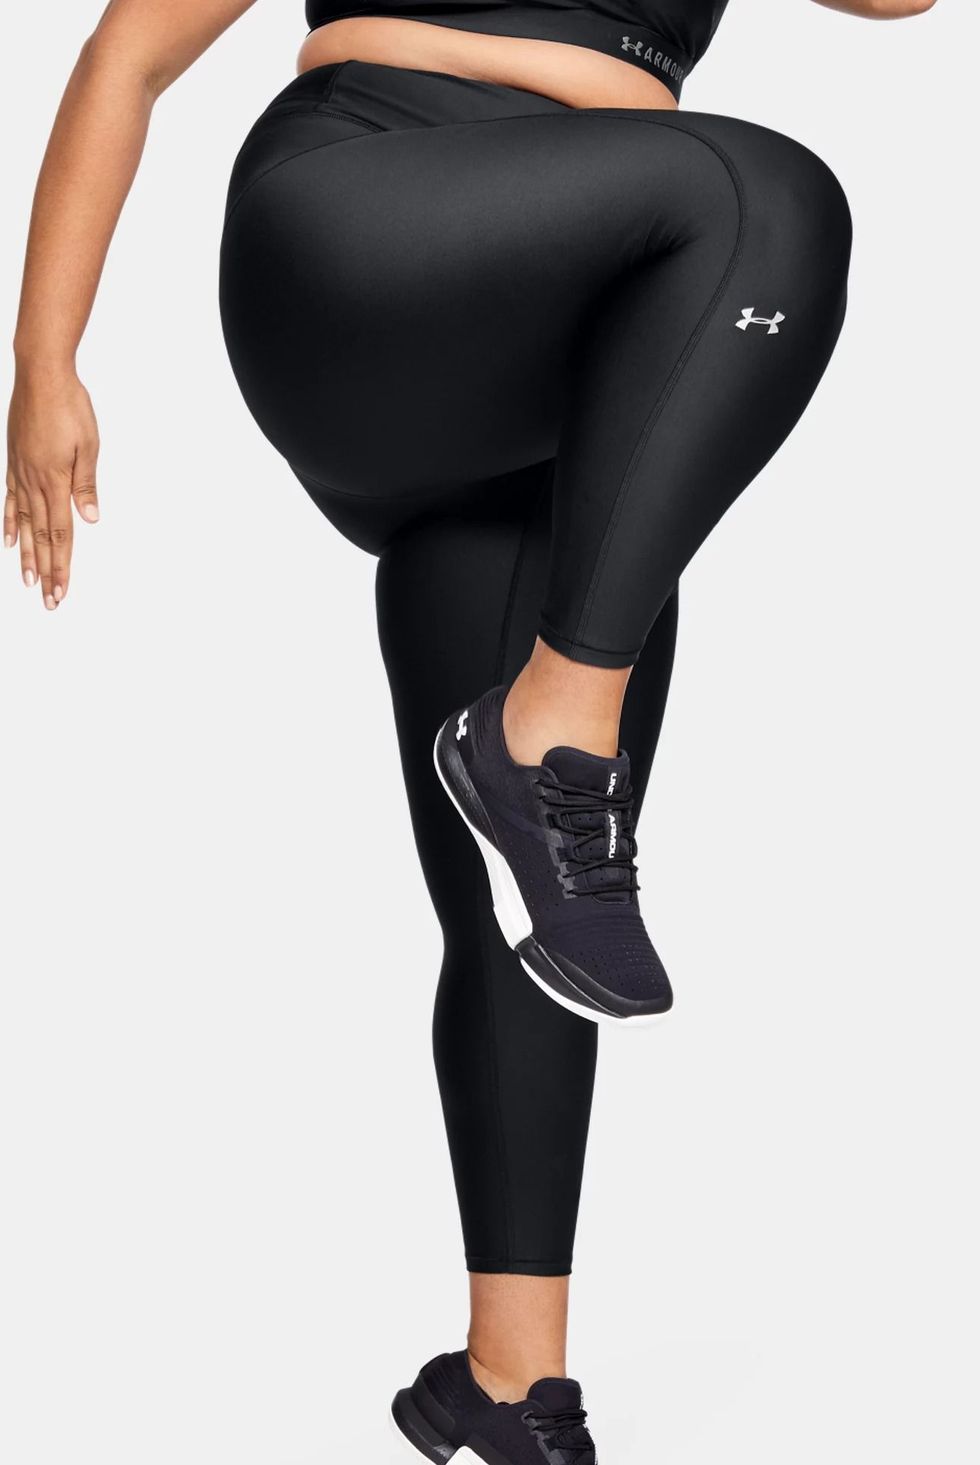 Nike cropped leggings dry fit small patterned  Cropped leggings, Guess  maxi dress, Workout pants black